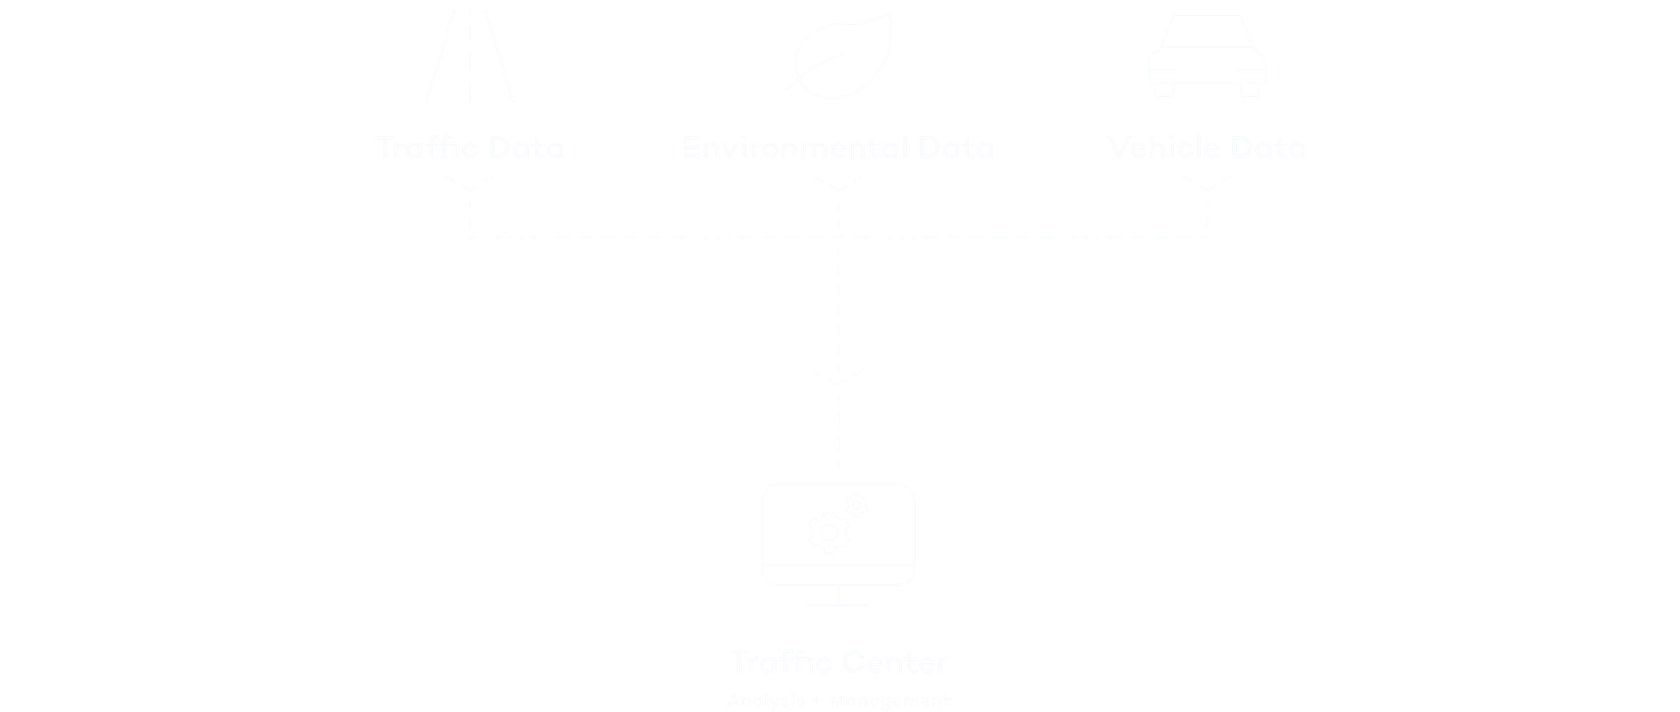 A smart network for traffic control